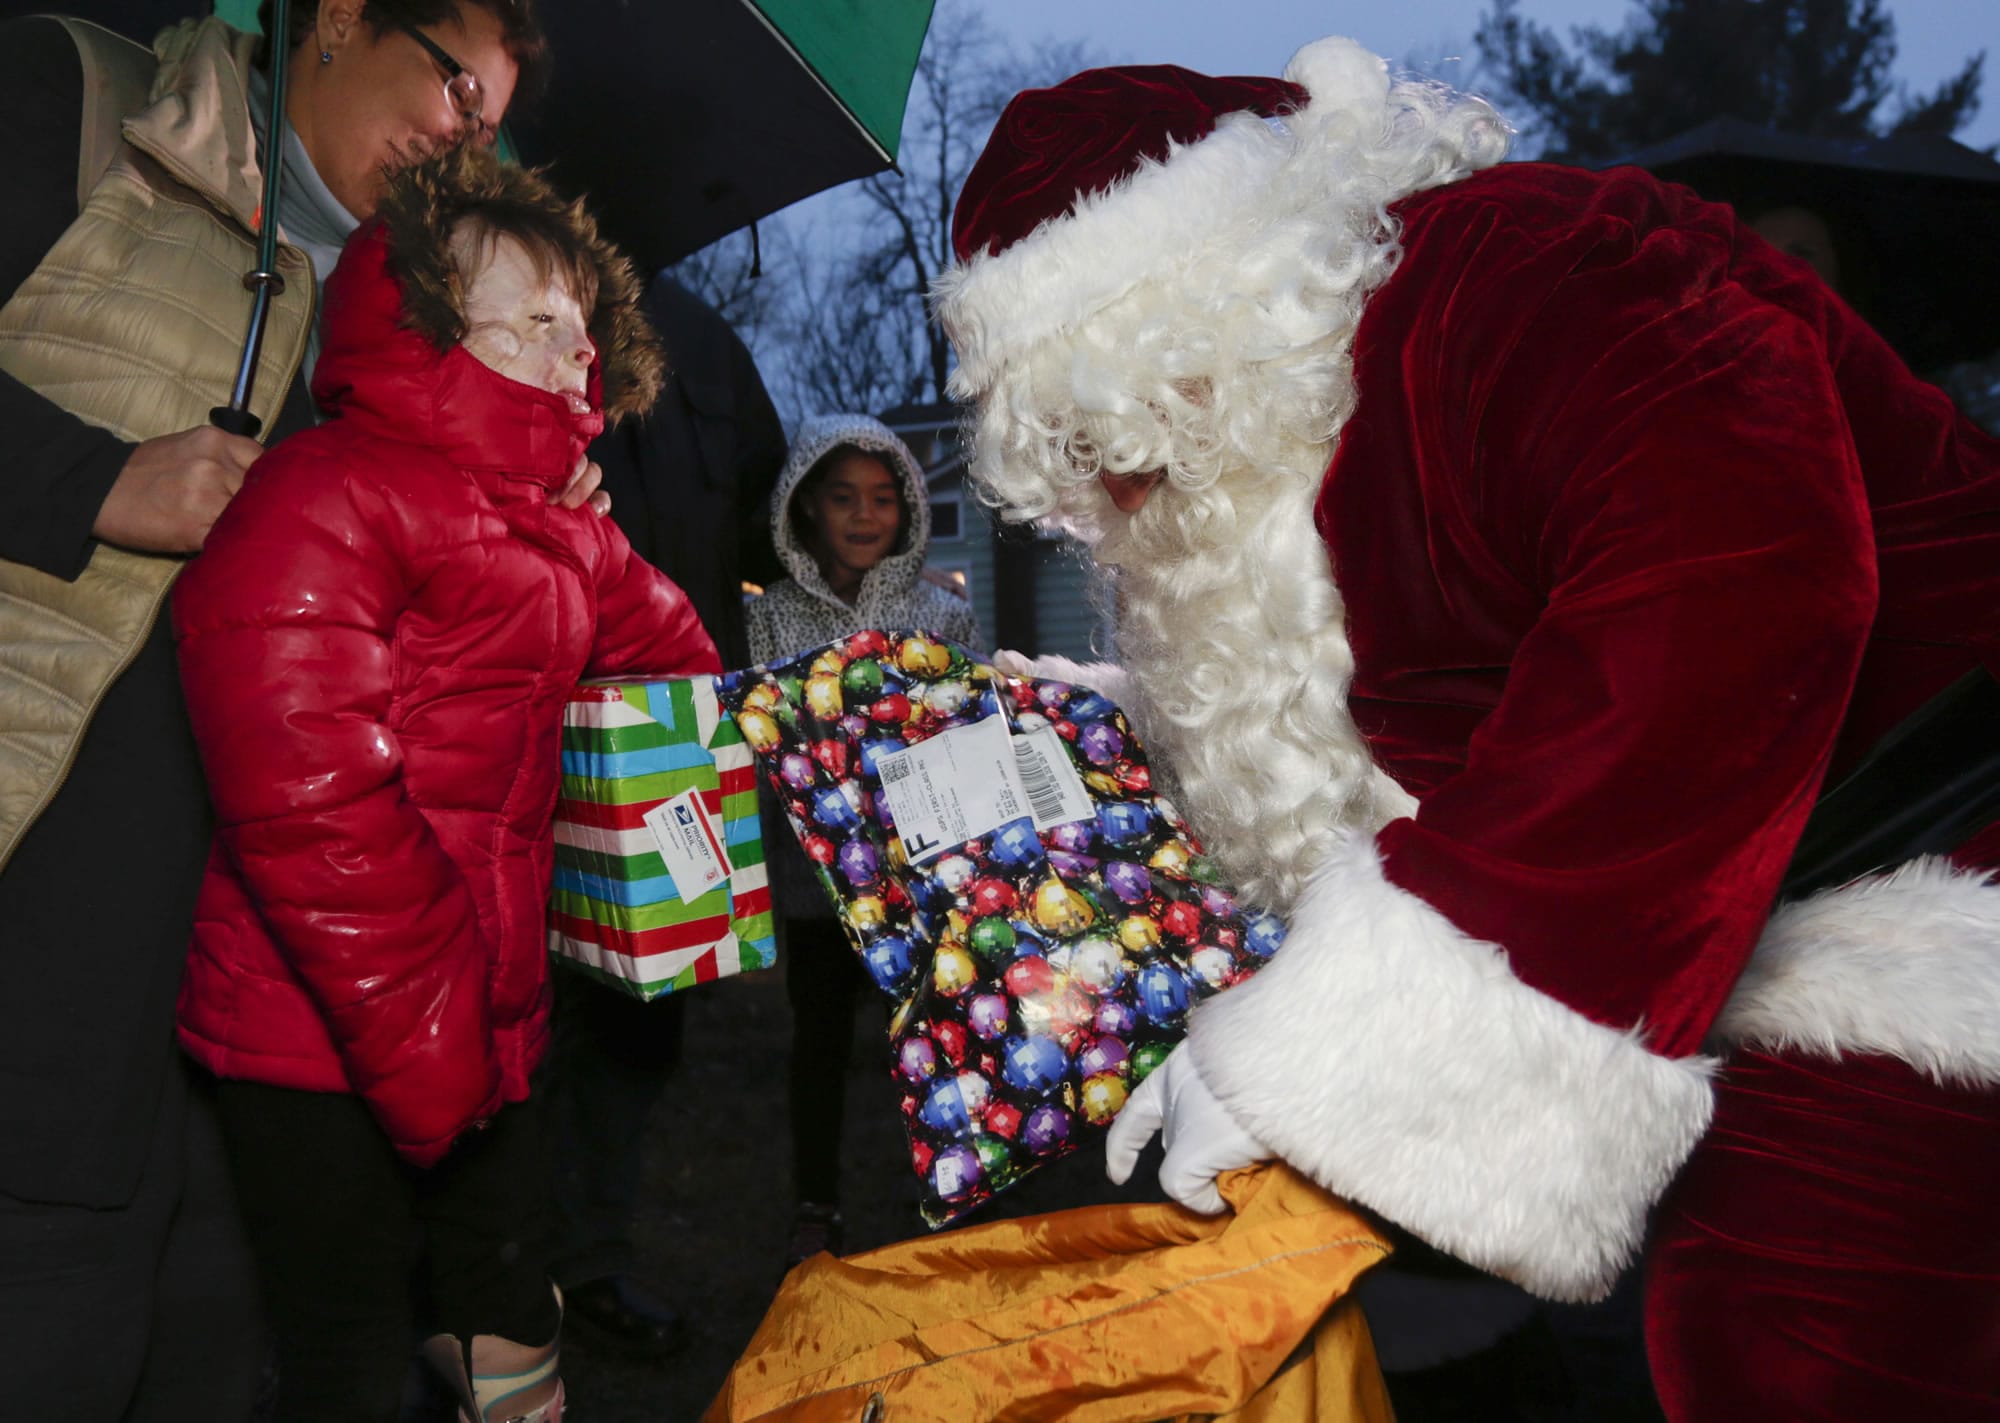 Safyre Terry, 8, receives packages from Santa Claus in Rotterdam, N.Y., on Dec. 17. Terry Lost her father and siblings in an arson fire that left her severely scarred.